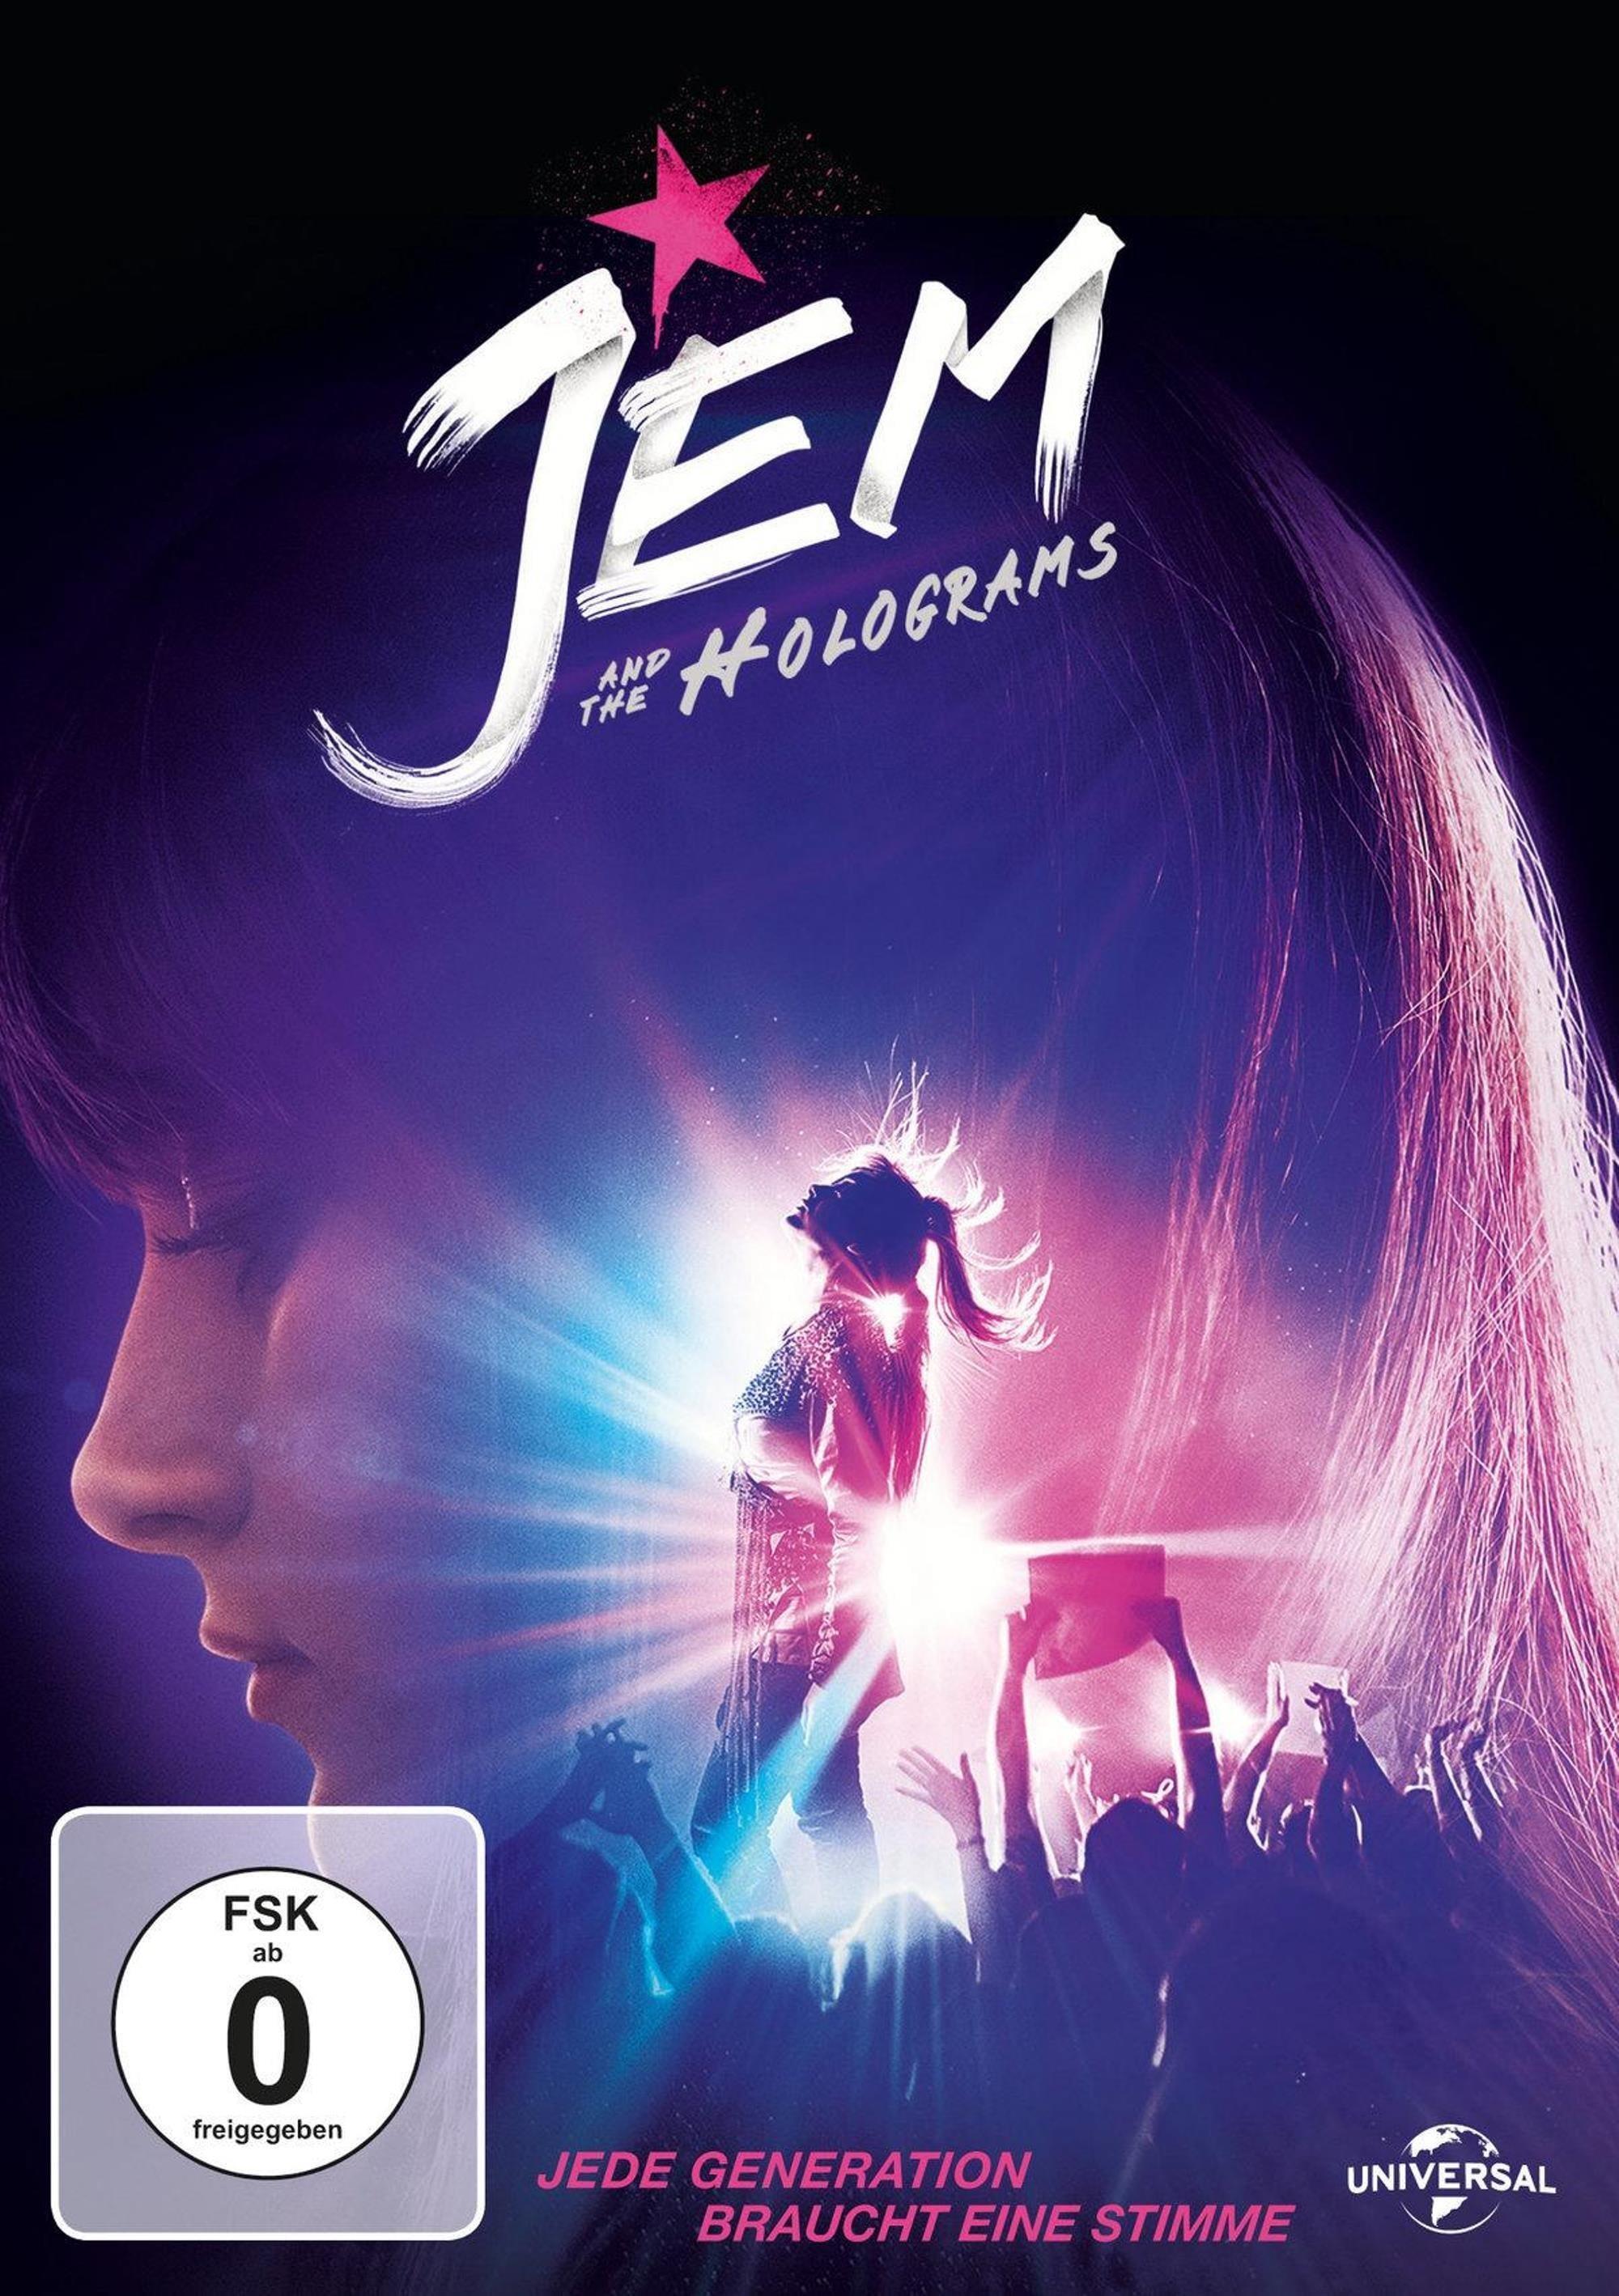 Jem and the Holograms poster